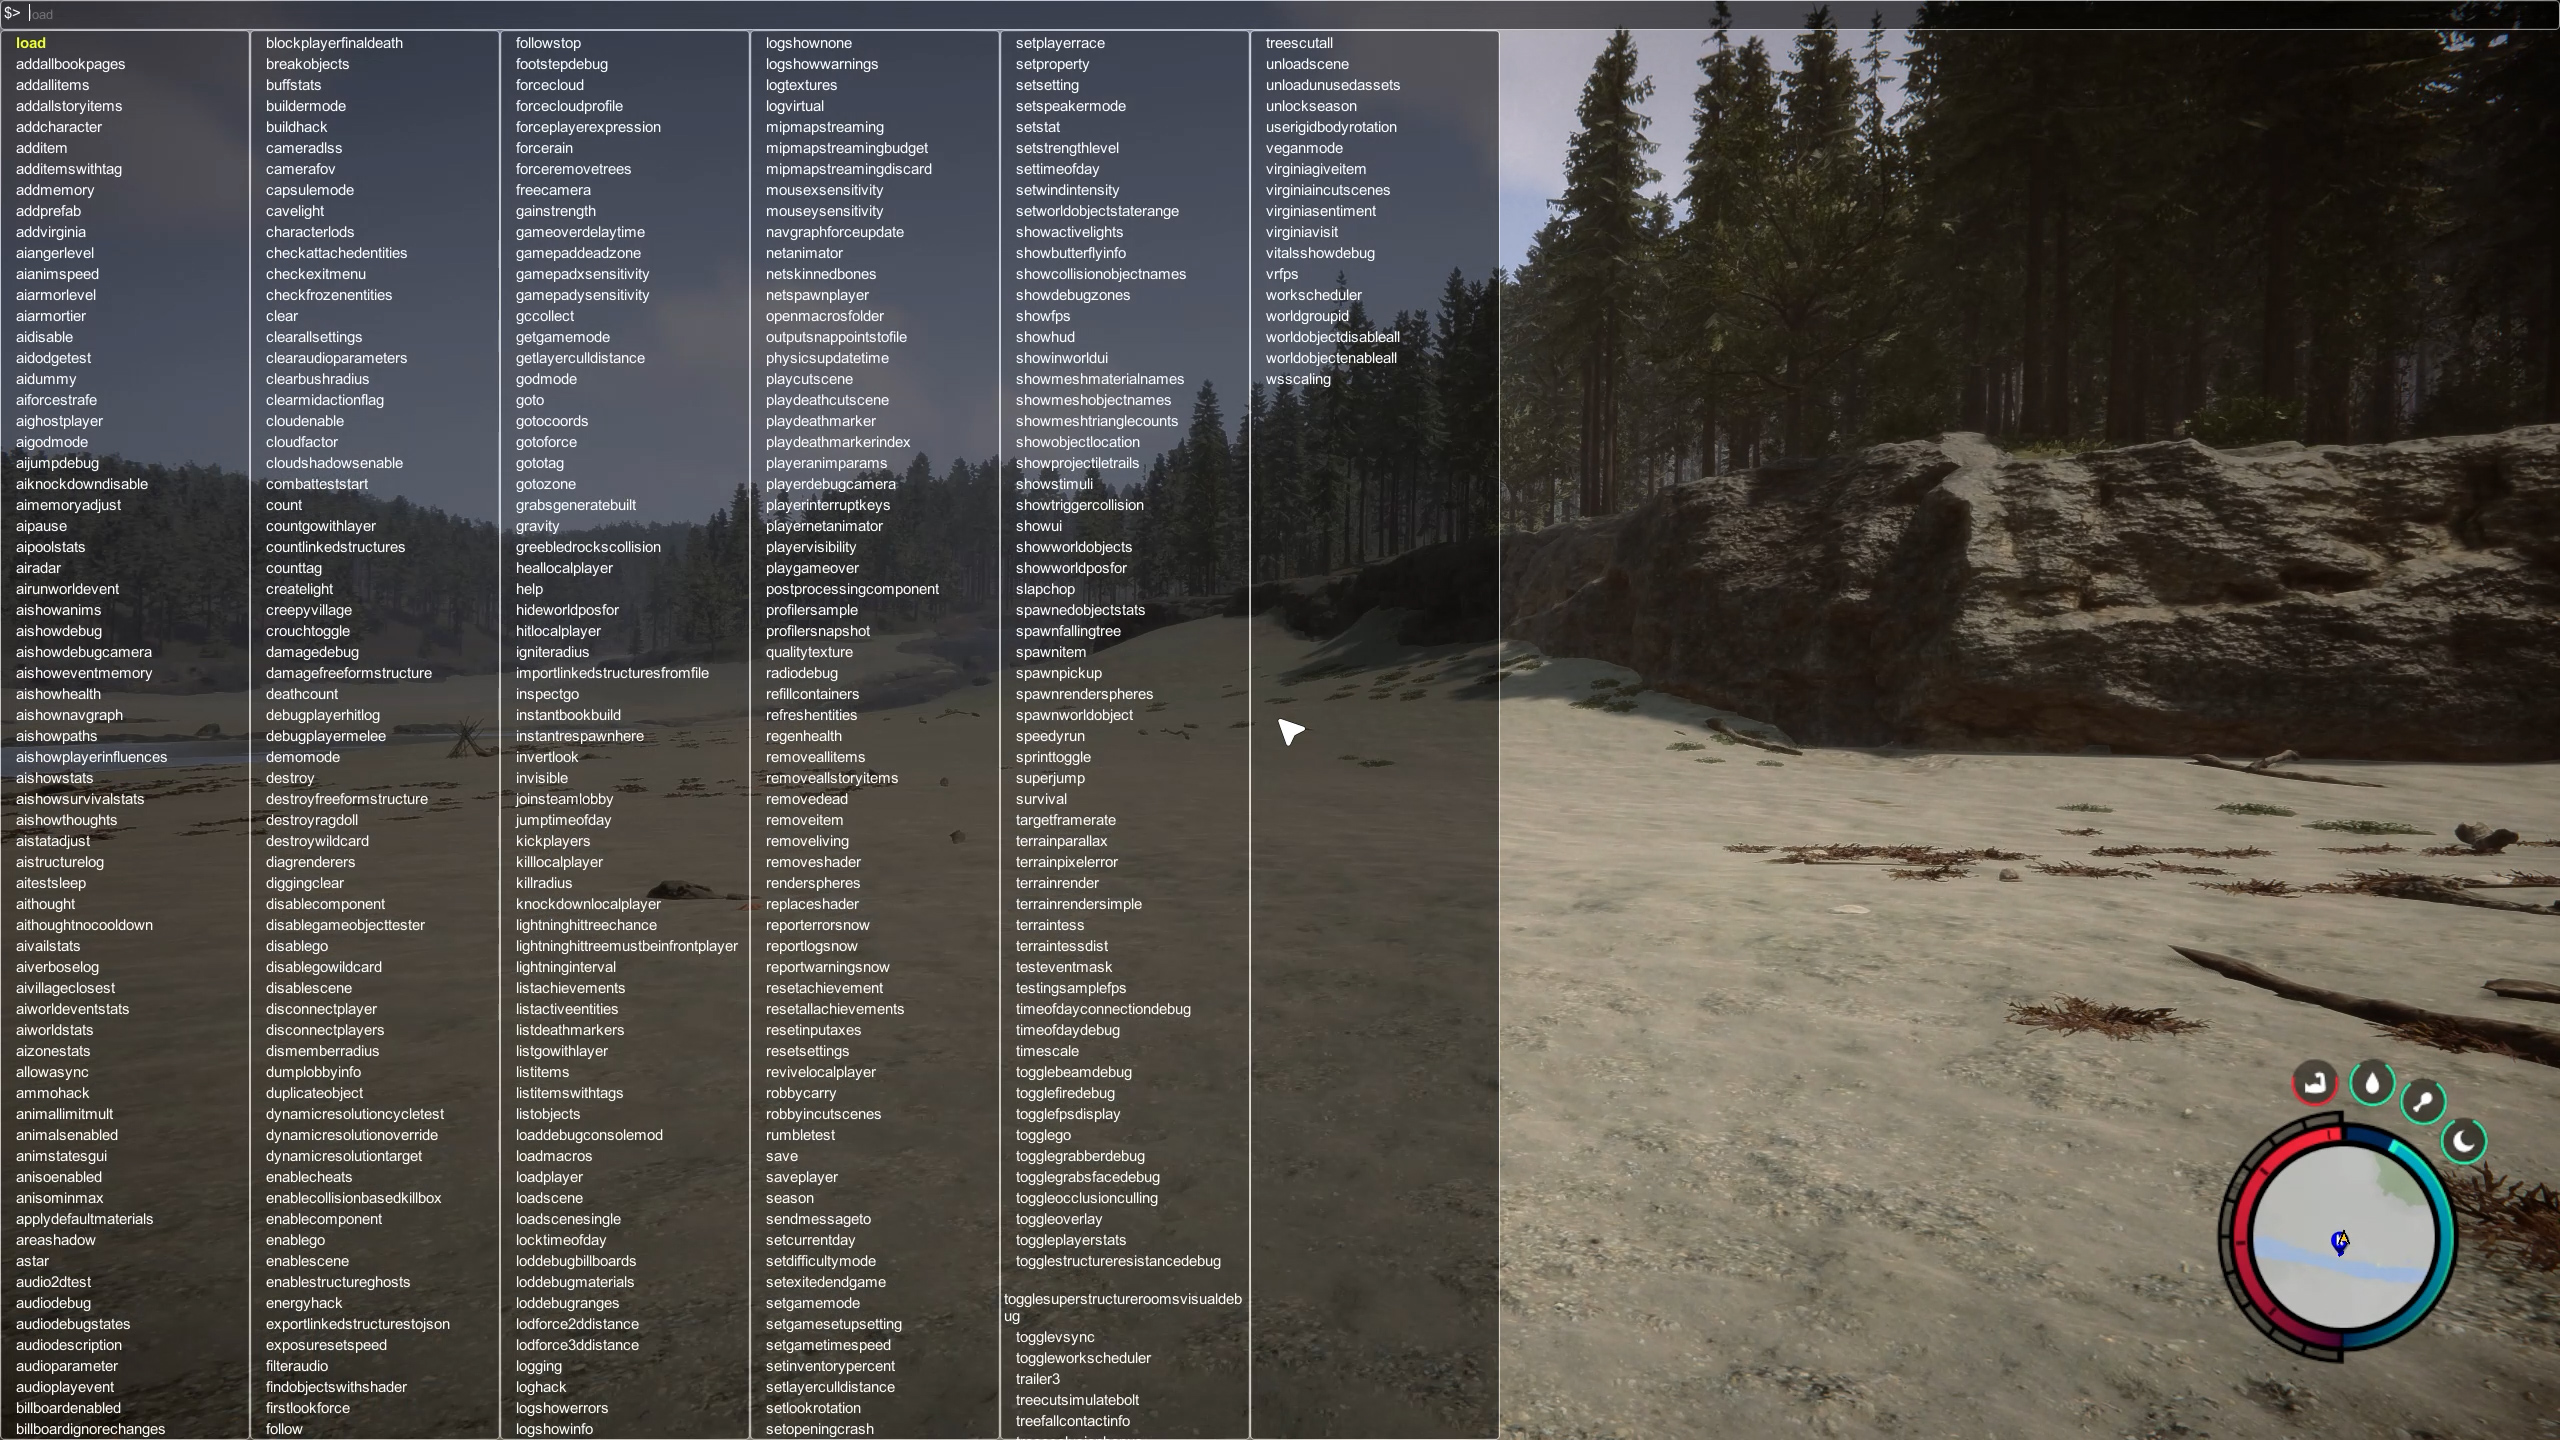 All console commands and cheats in Sons of the Forest - Gamepur